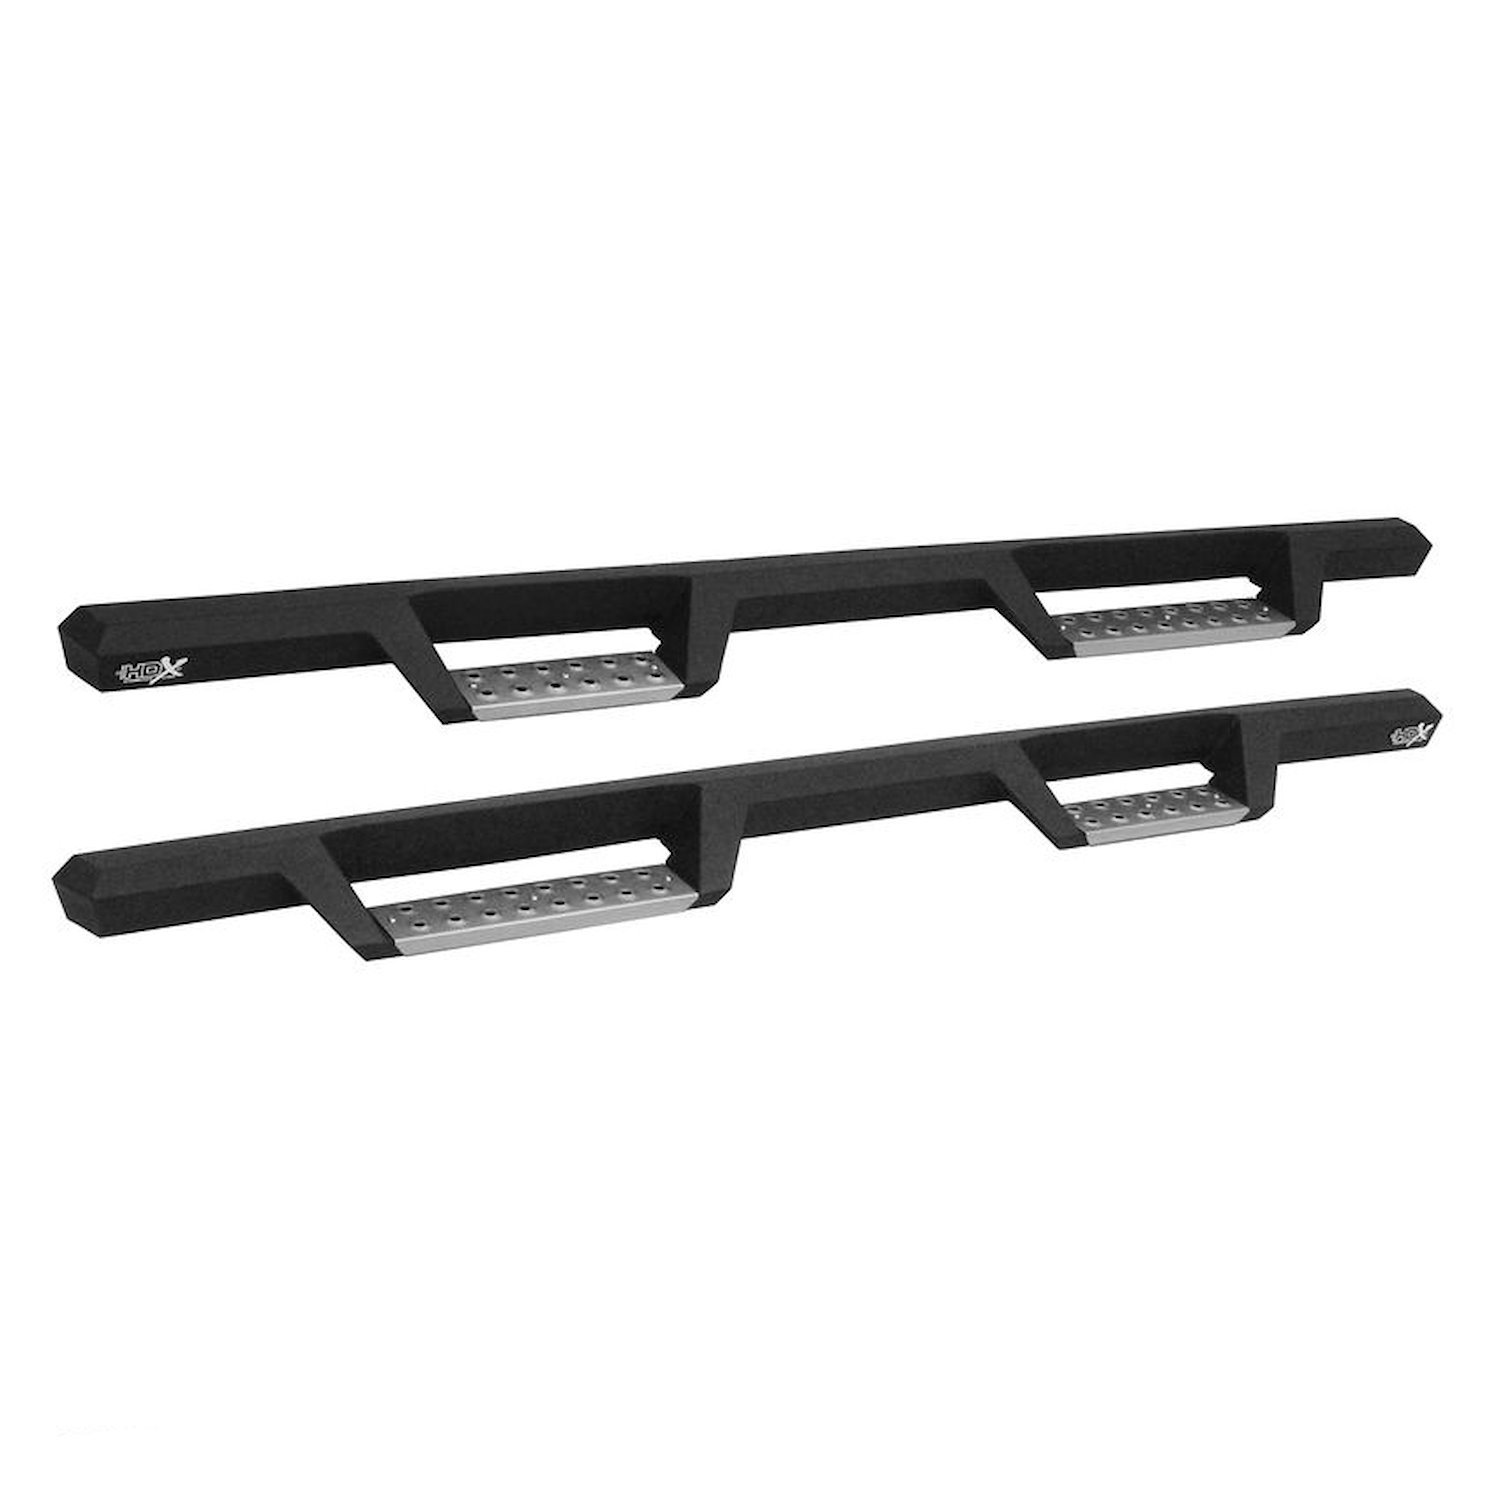 HDX Drop Step Nerf Bars for 2015-2018 Chevy Colorado/GMC Canyon Extended Cab